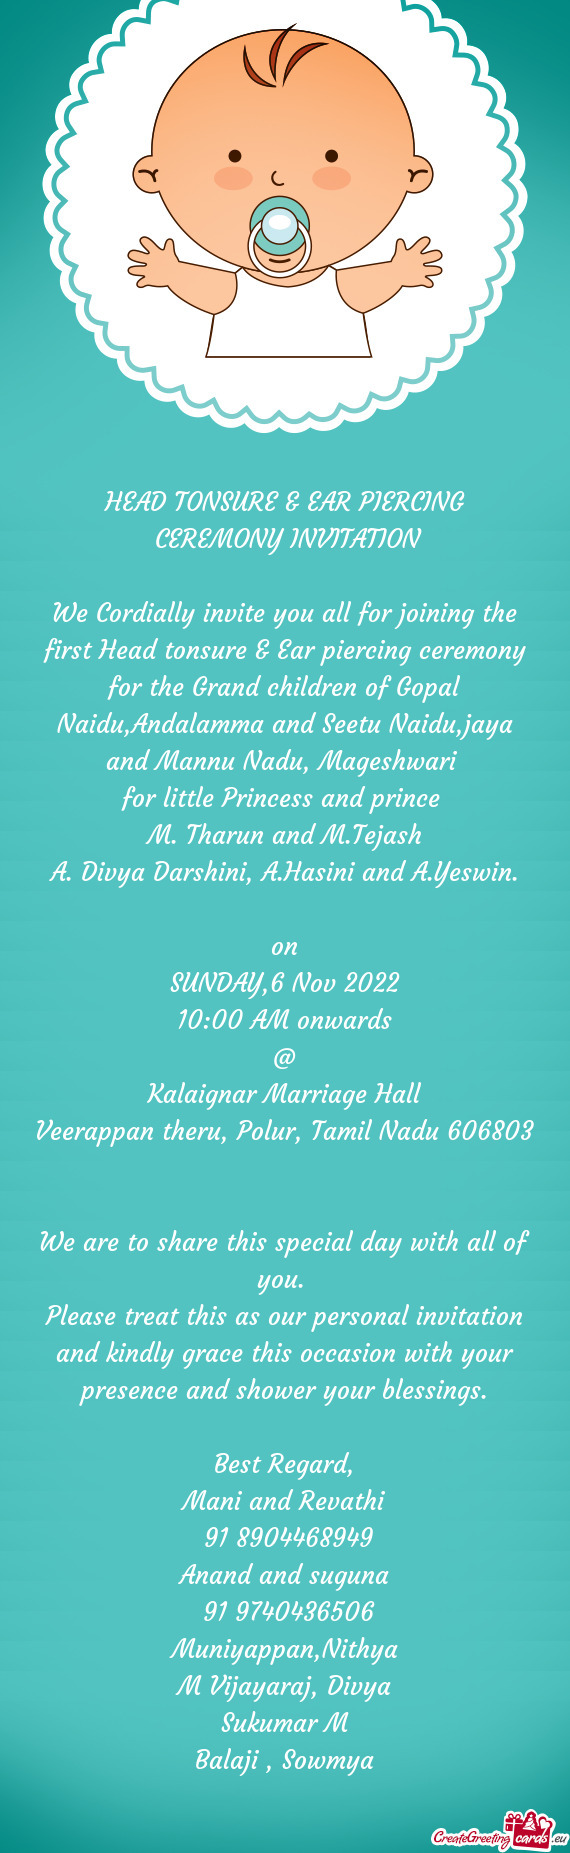 We Cordially invite you all for joining the first Head tonsure & Ear piercing ceremony for the Grand